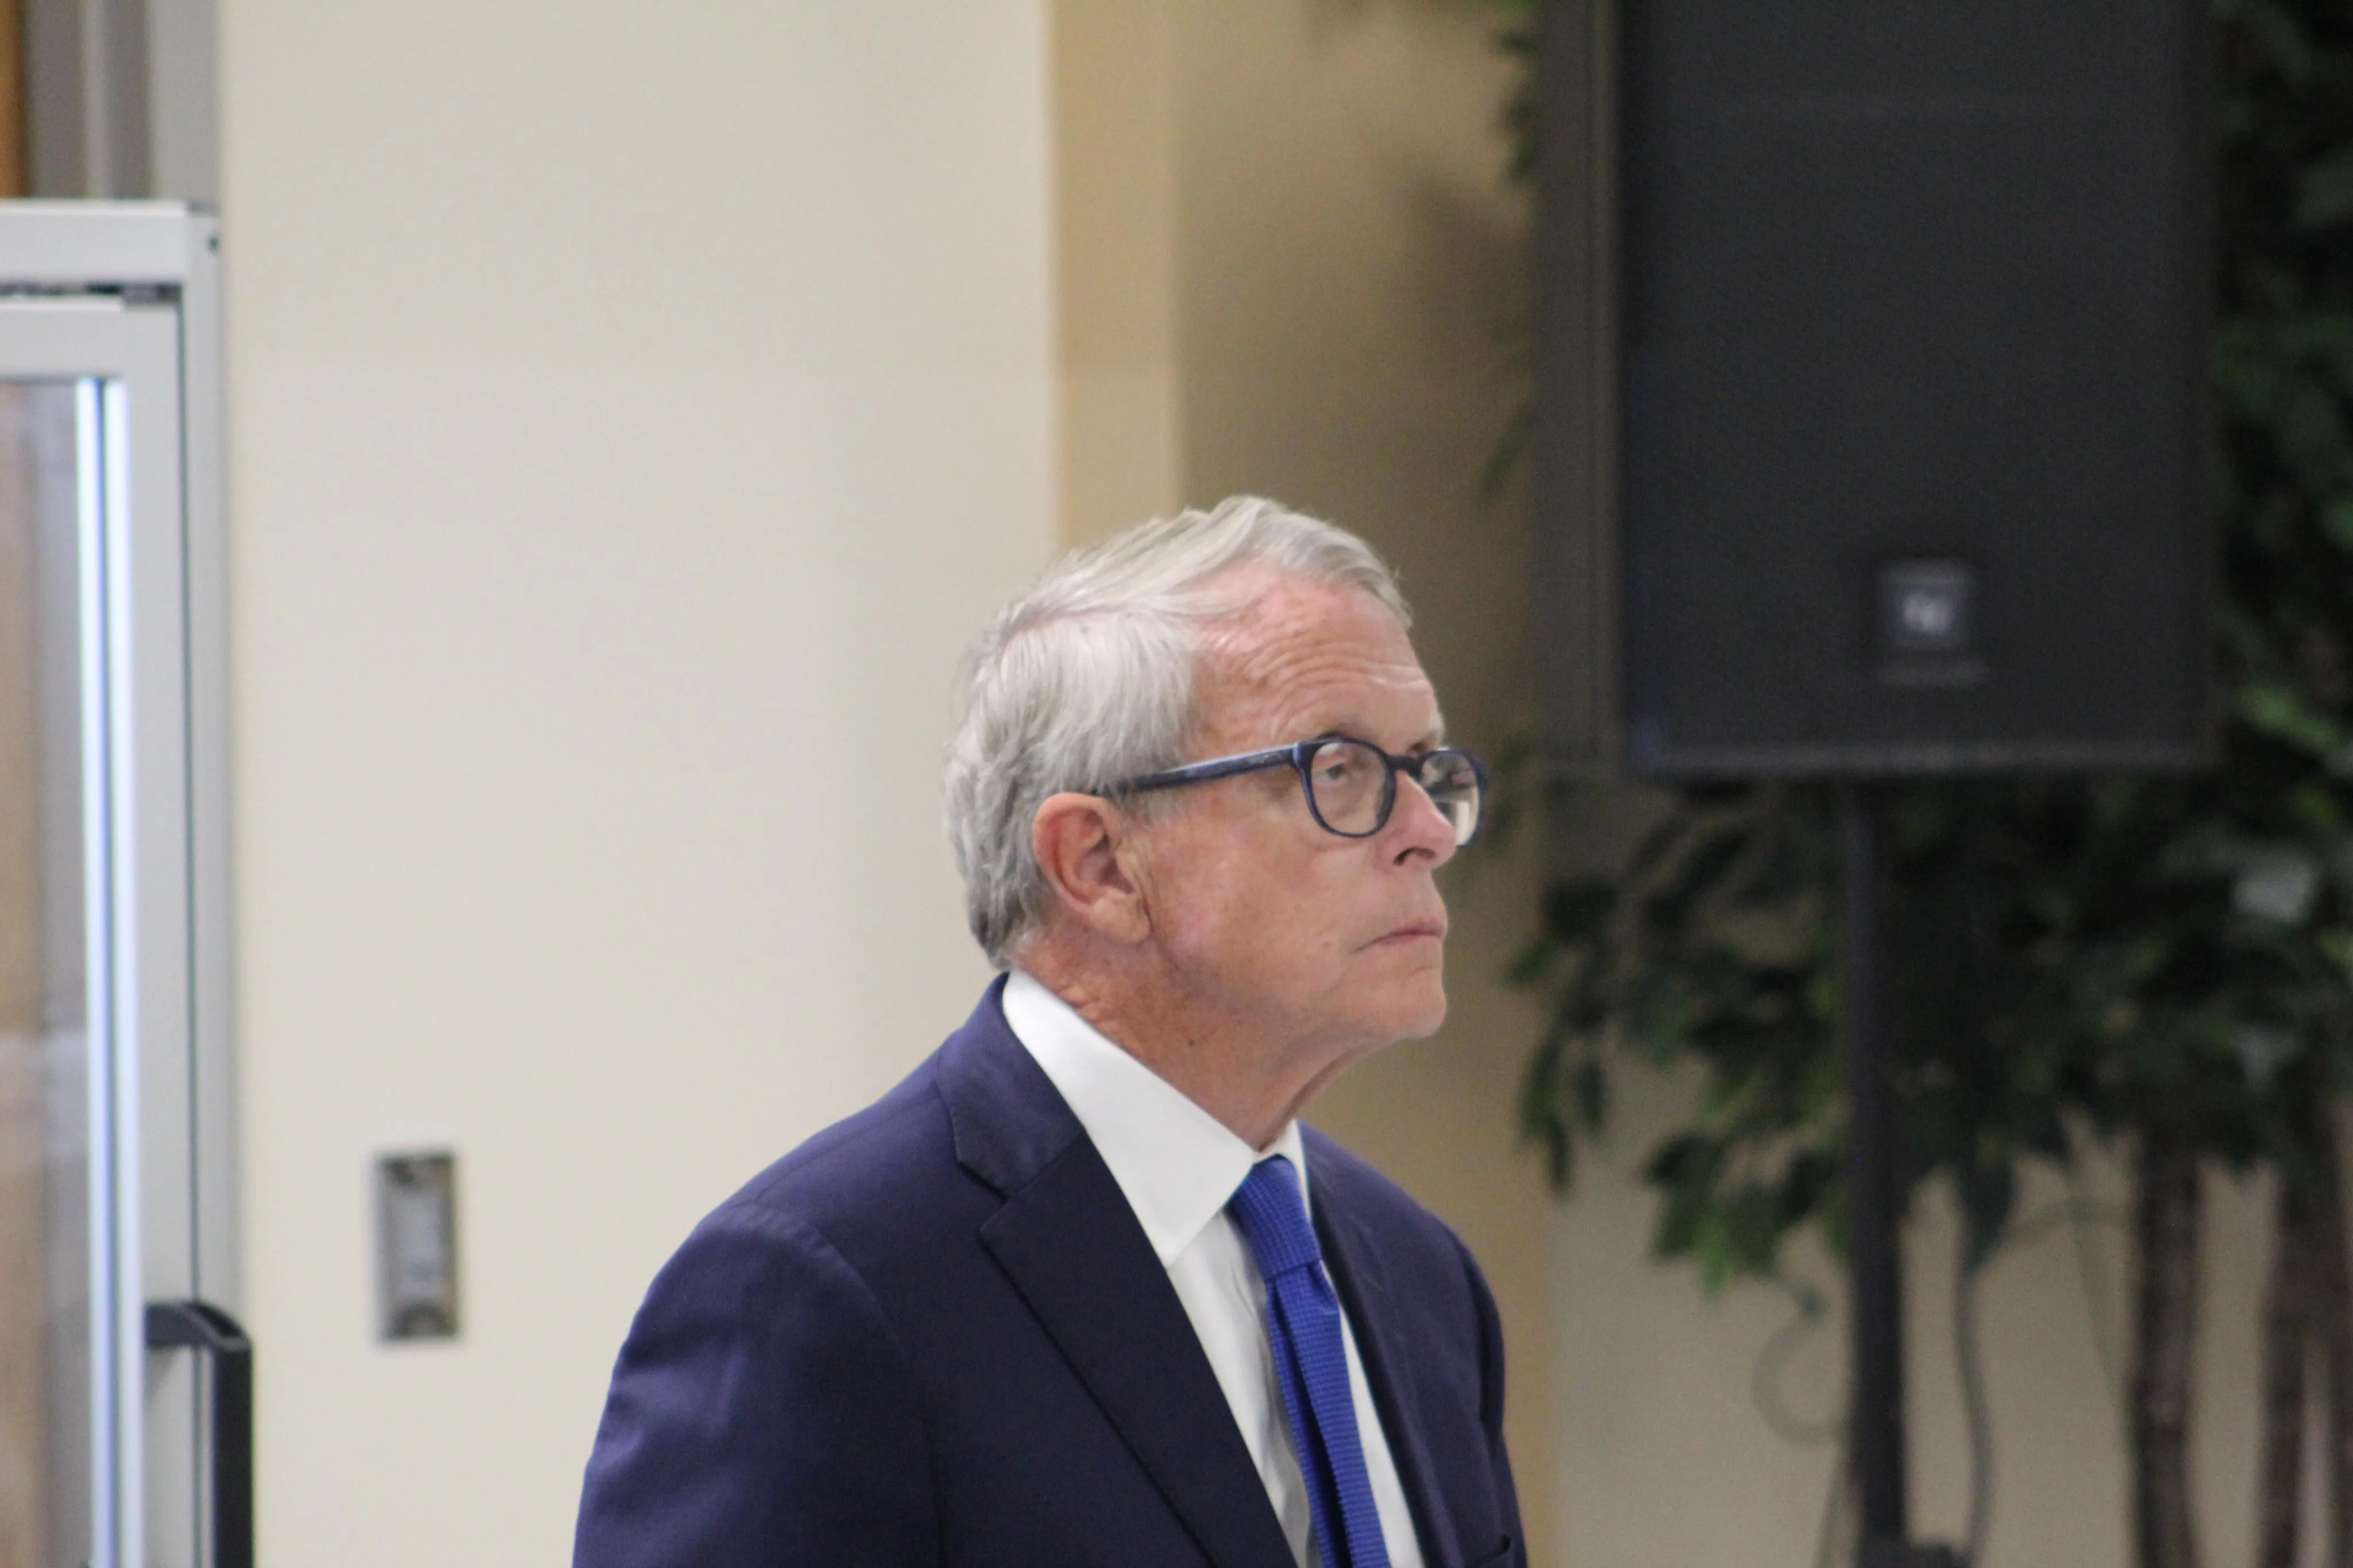 Ohio Gov. Mike DeWine visits Pickaway-Ross Career and Technology Center in Chillicothe, Ohio, Sept. 16, 2022.?w=200&h=150